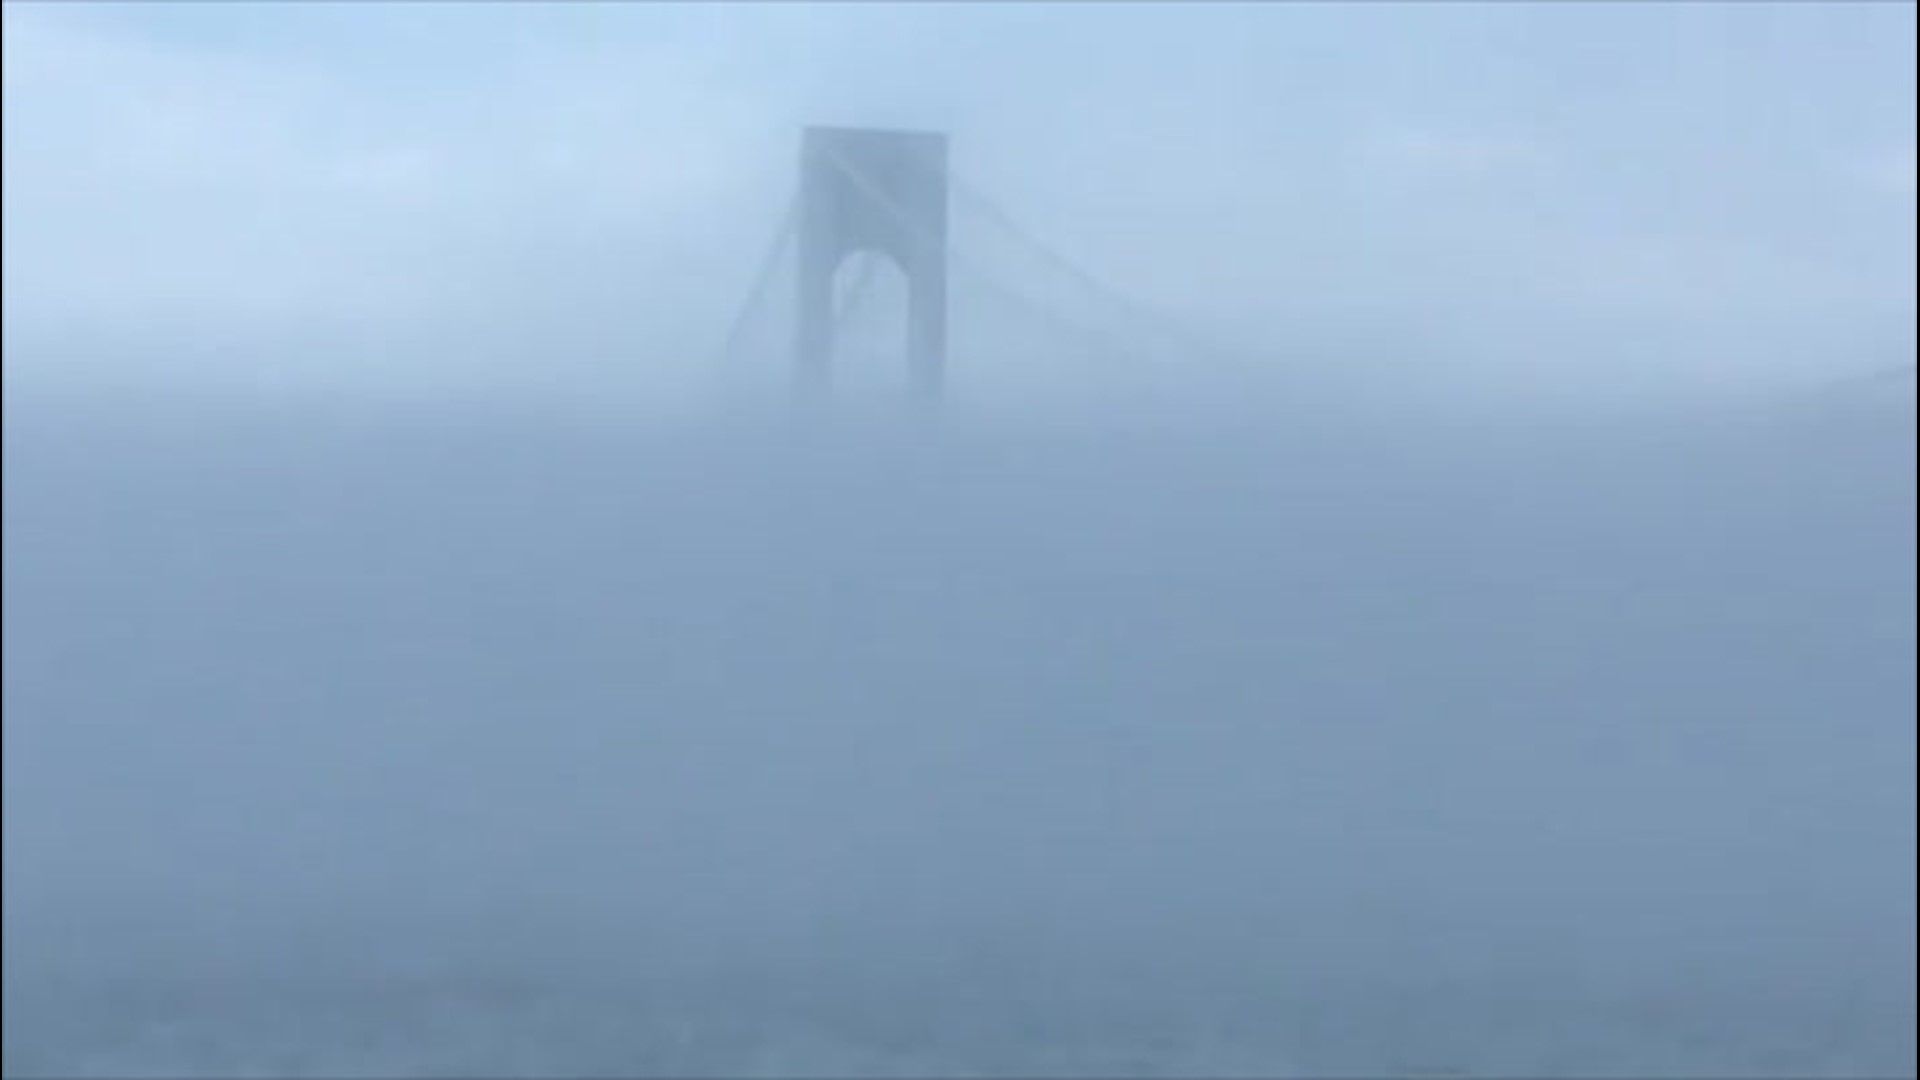 You couldn't see anything from the other side due to this dense fog bank in Brooklyn, New York, on May 27. The bridge looks like it disappears into the fog.